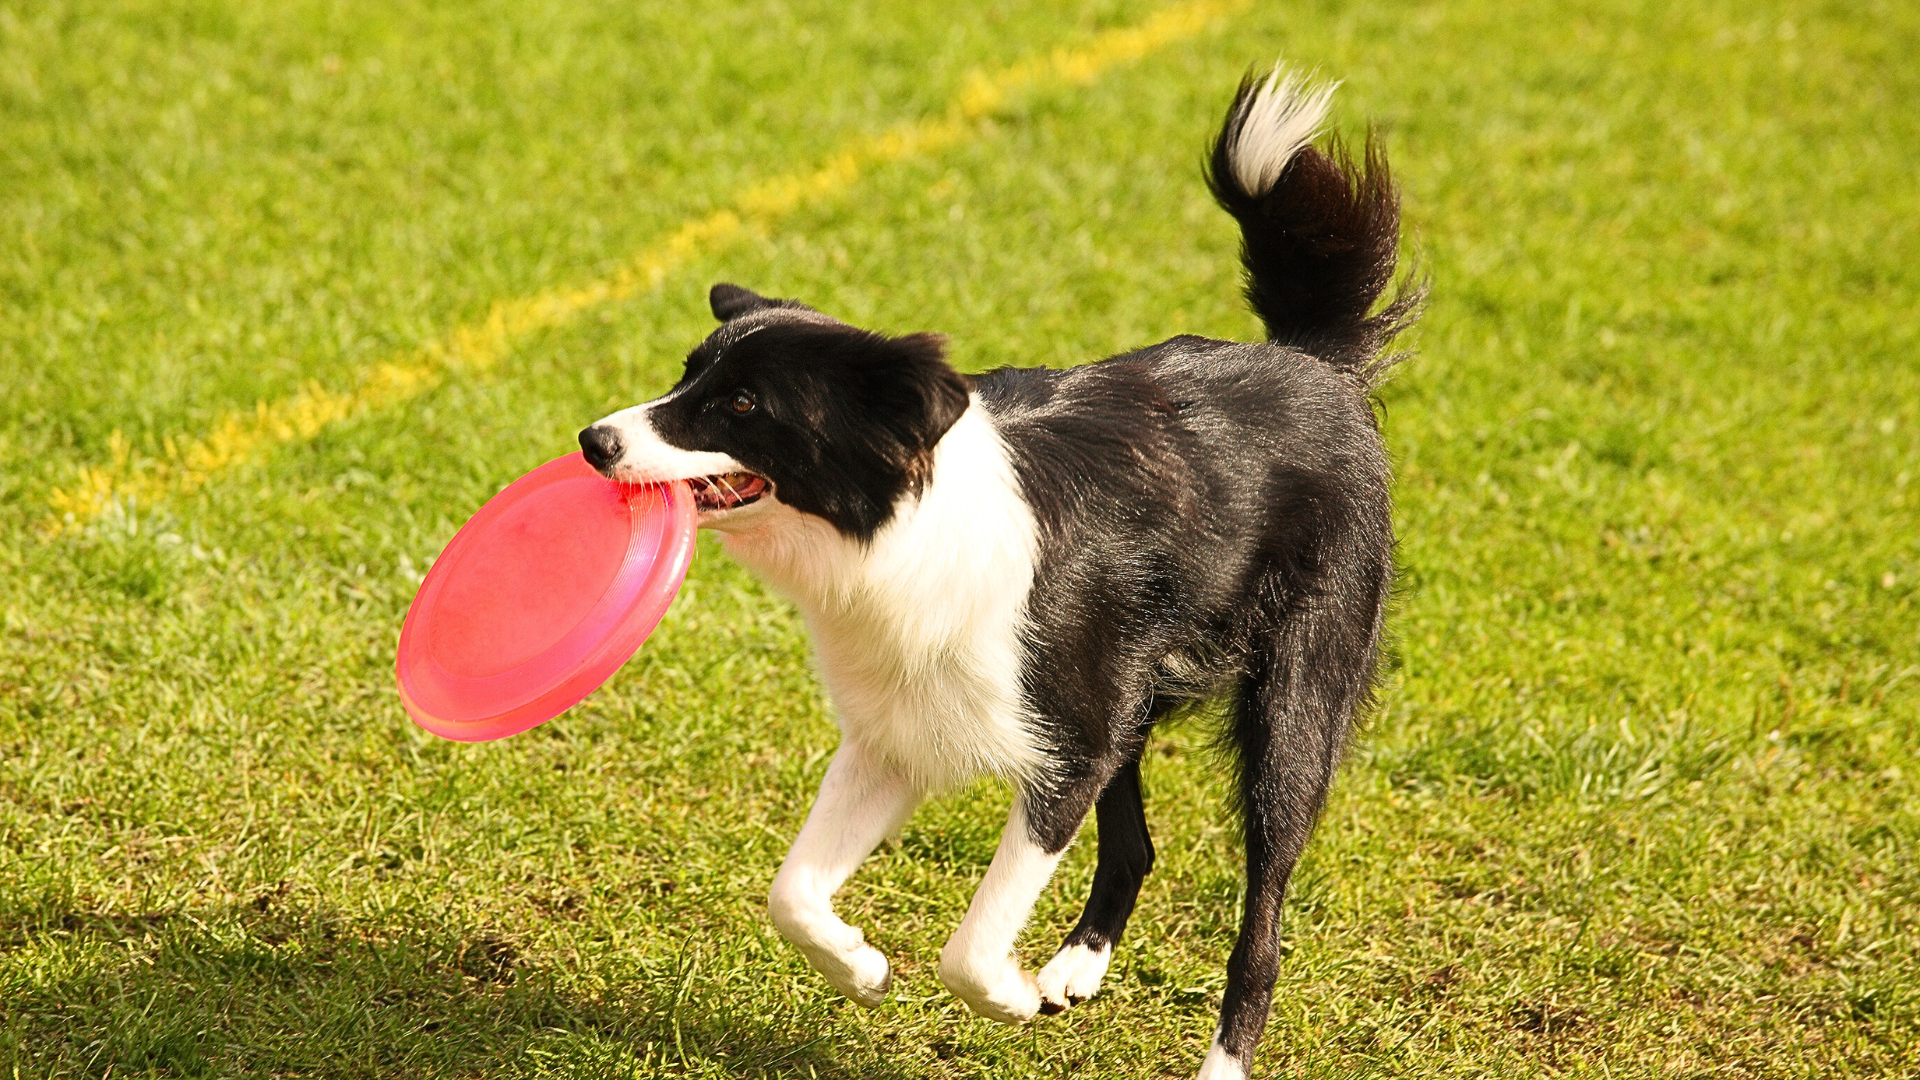 Dog playing with a frisbee.